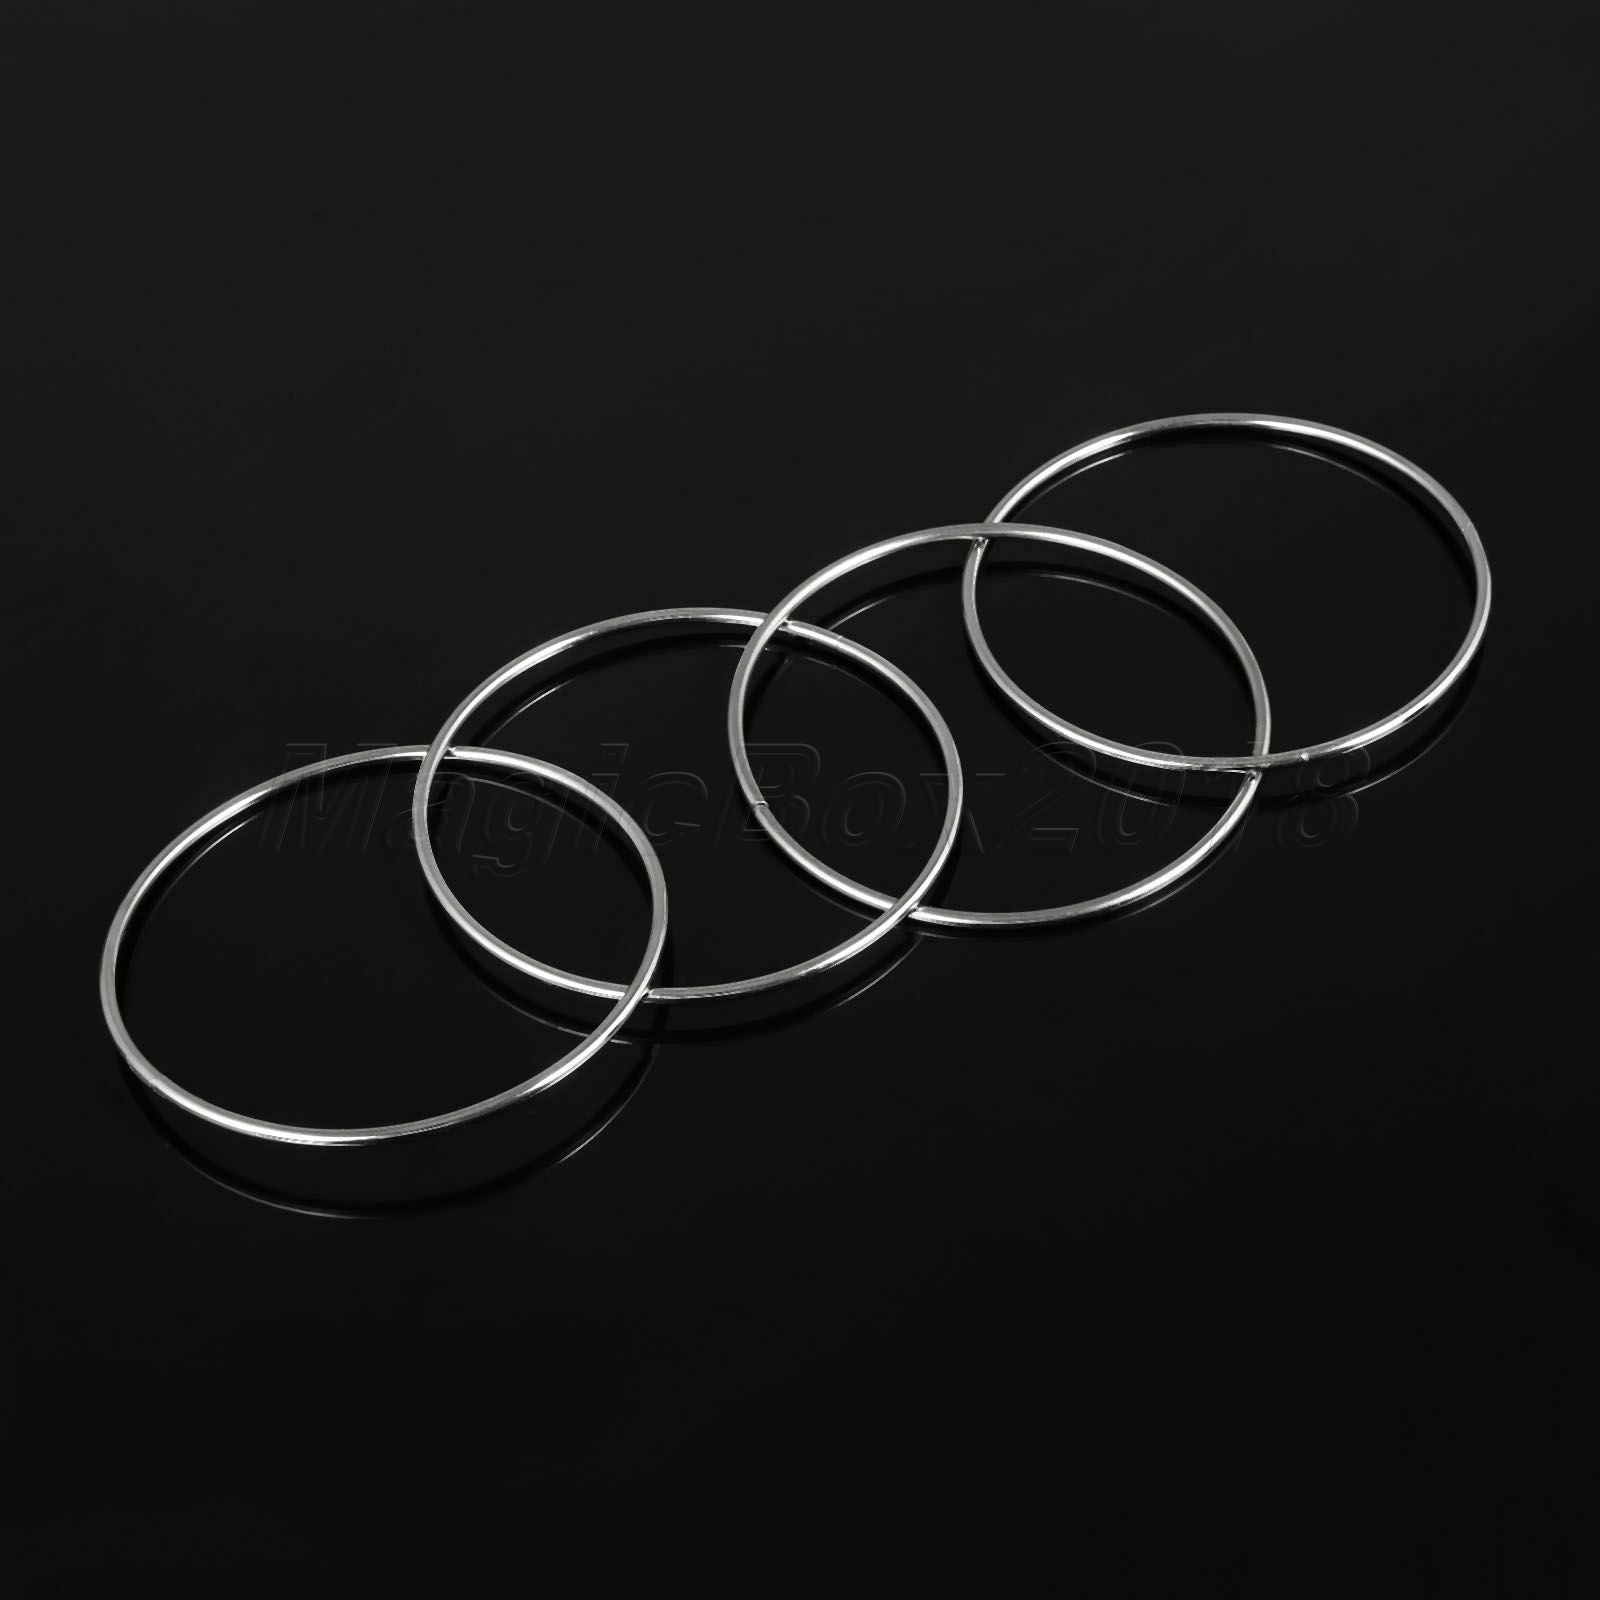 1set Chain Chinese Rings Close-Up Stage Magic Trick Props Classic Toys 10cm Dia.